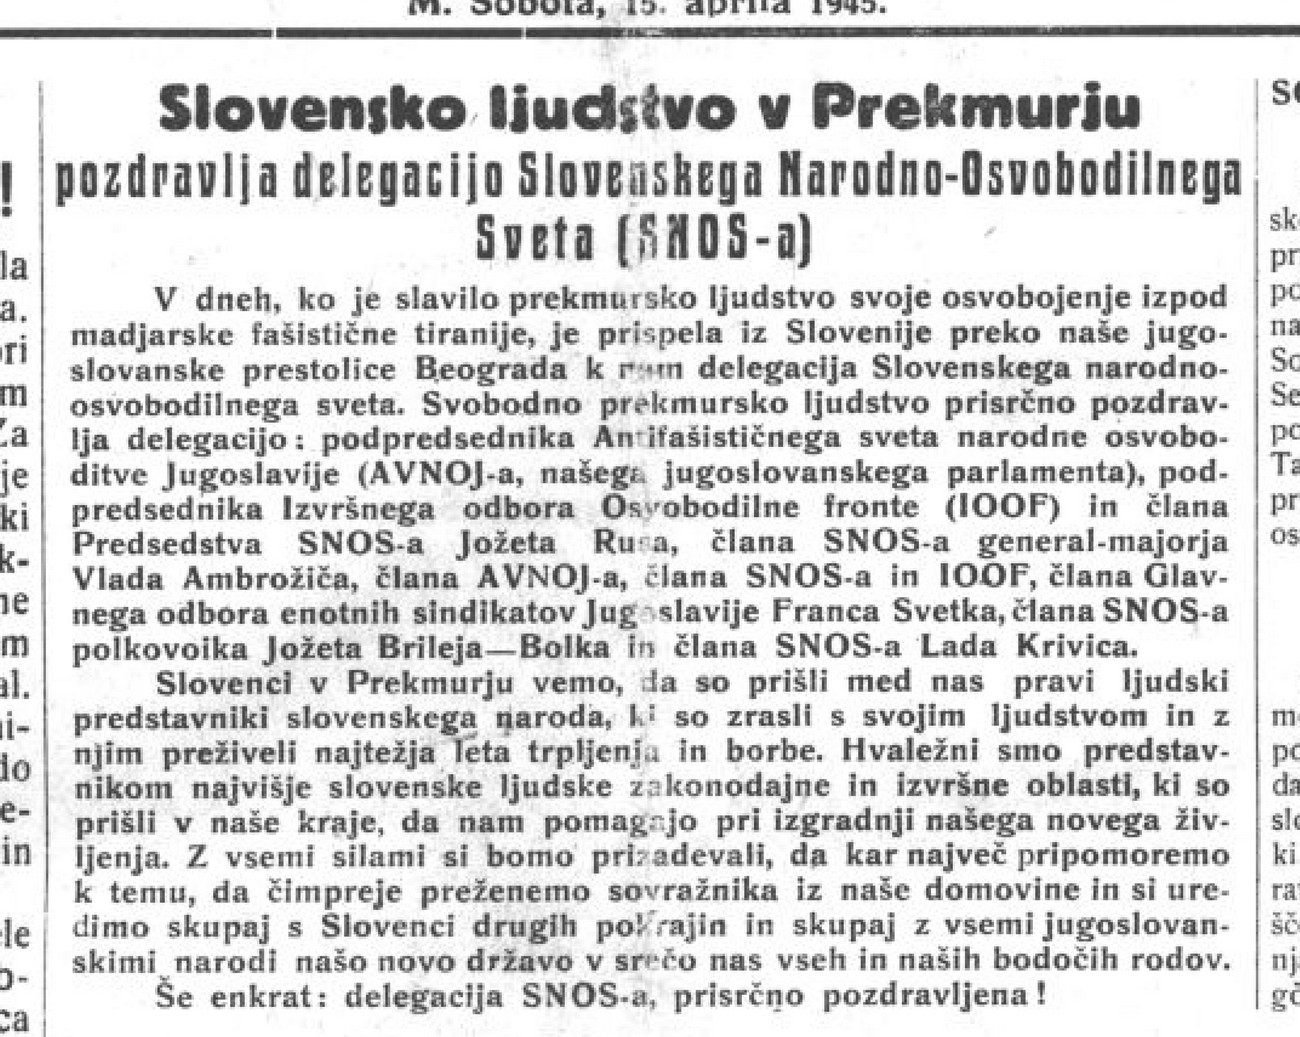 Cover of the first issue of the Novi čas newspaper (March 15, 1945). It was edited by partisan and writer Ferdo Godina.